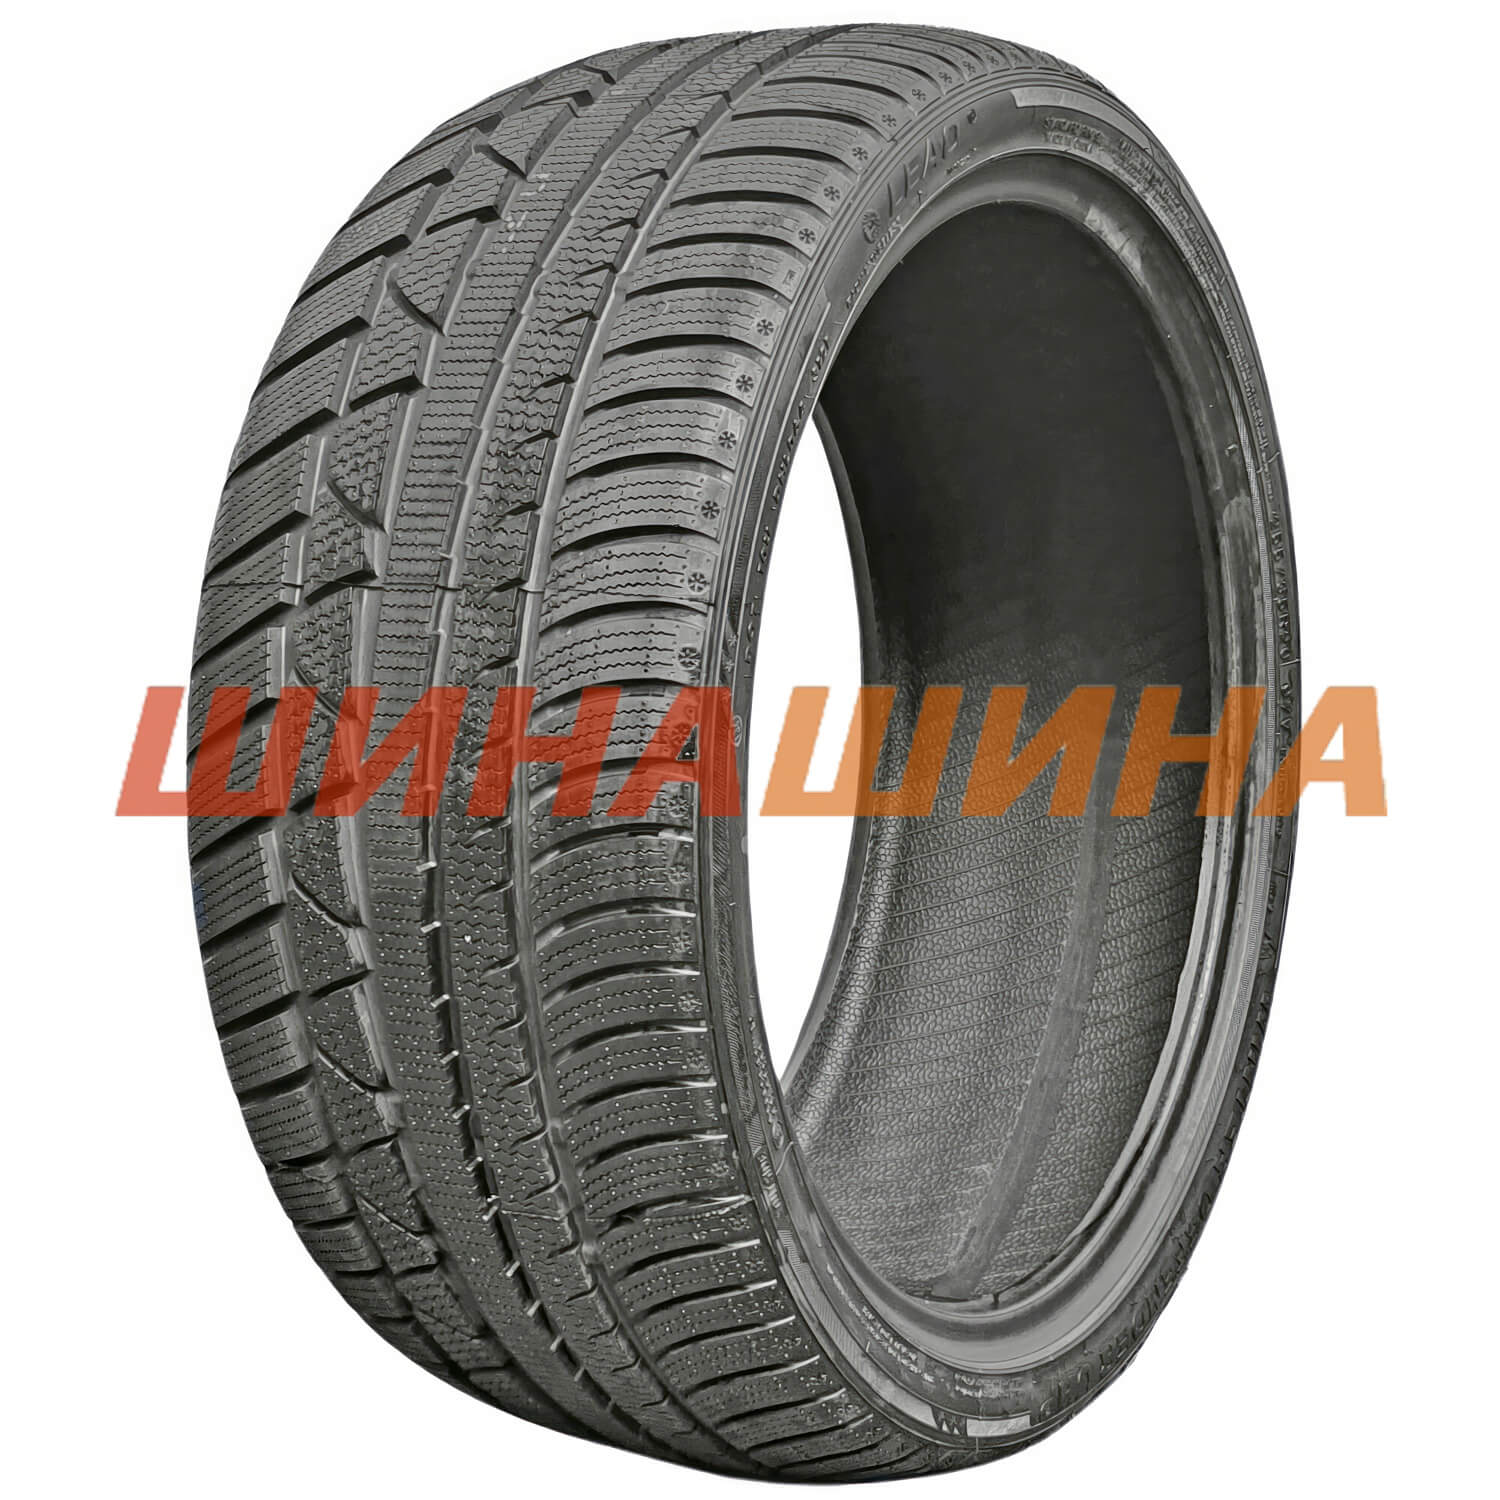 Leao Winter Defender UHP 255/55 R19 111H XL